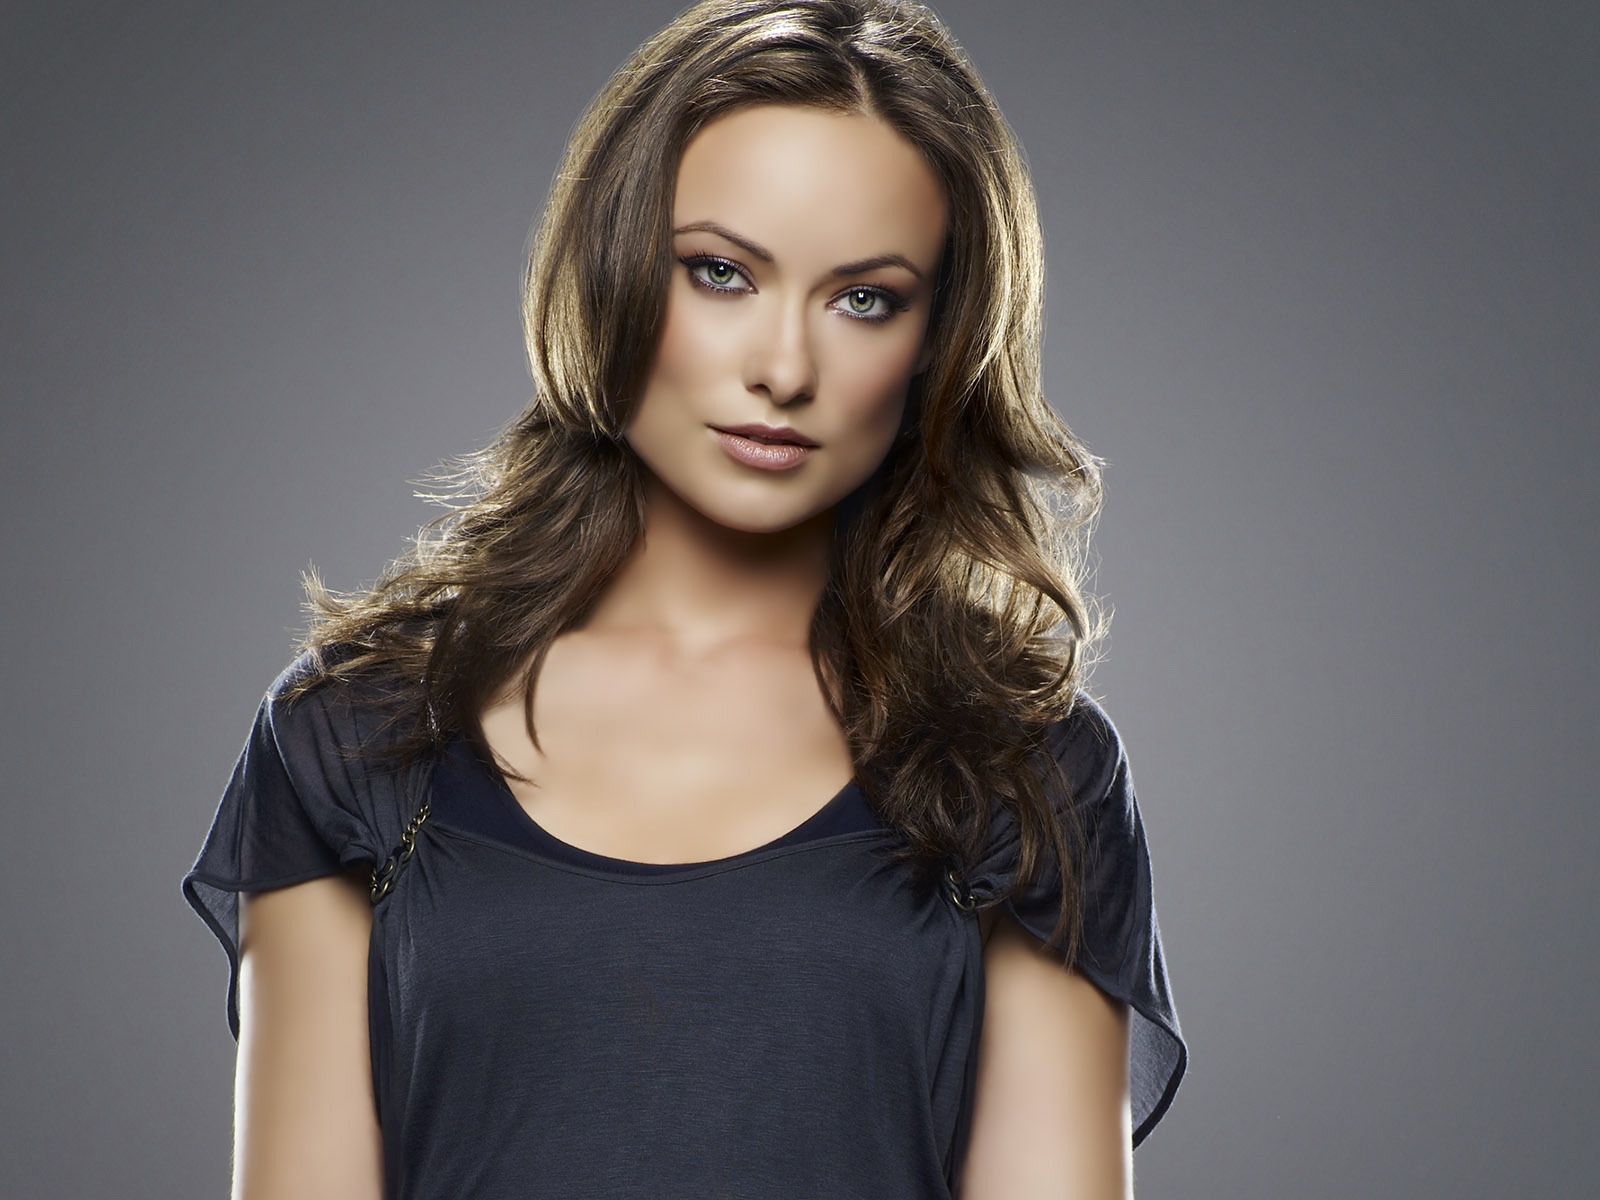 Olivia Wilde Actress for 1600 x 1200 resolution